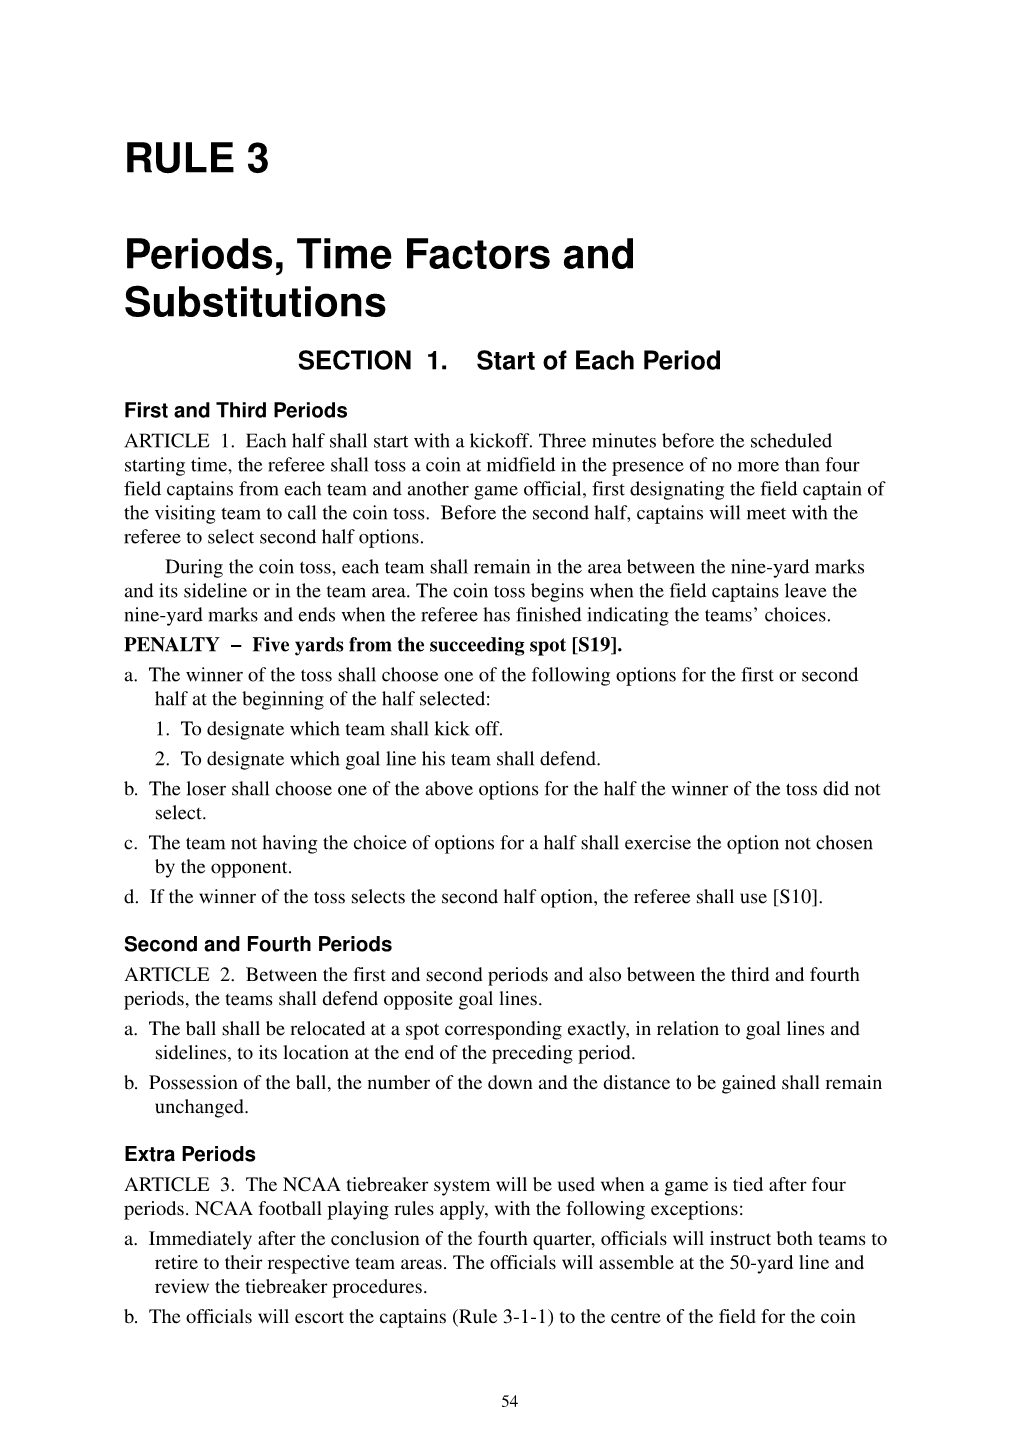 RULE 3 Periods, Time Factors and Substitutions